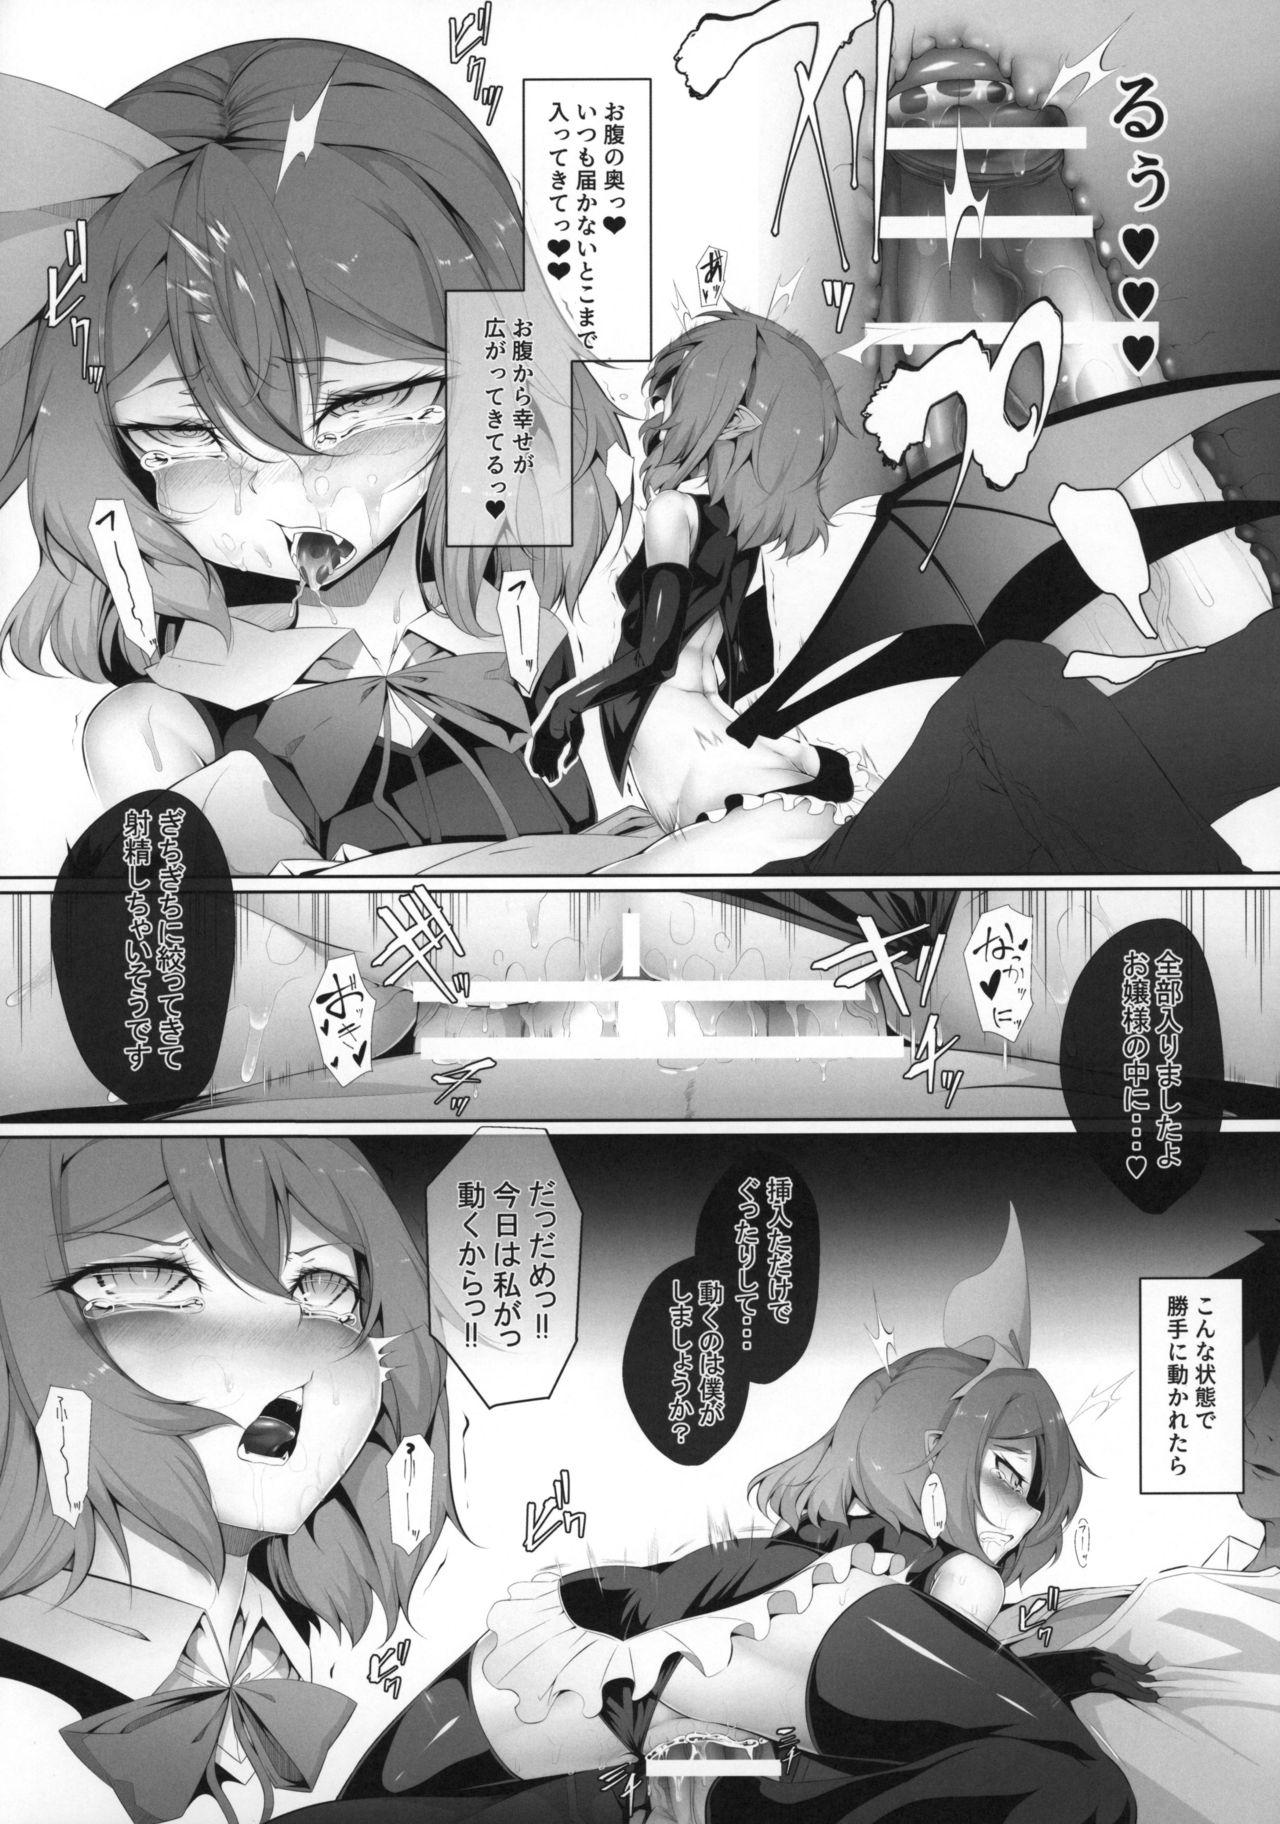 Chinese M.P. vol. 19 - Touhou project Teasing - Page 10